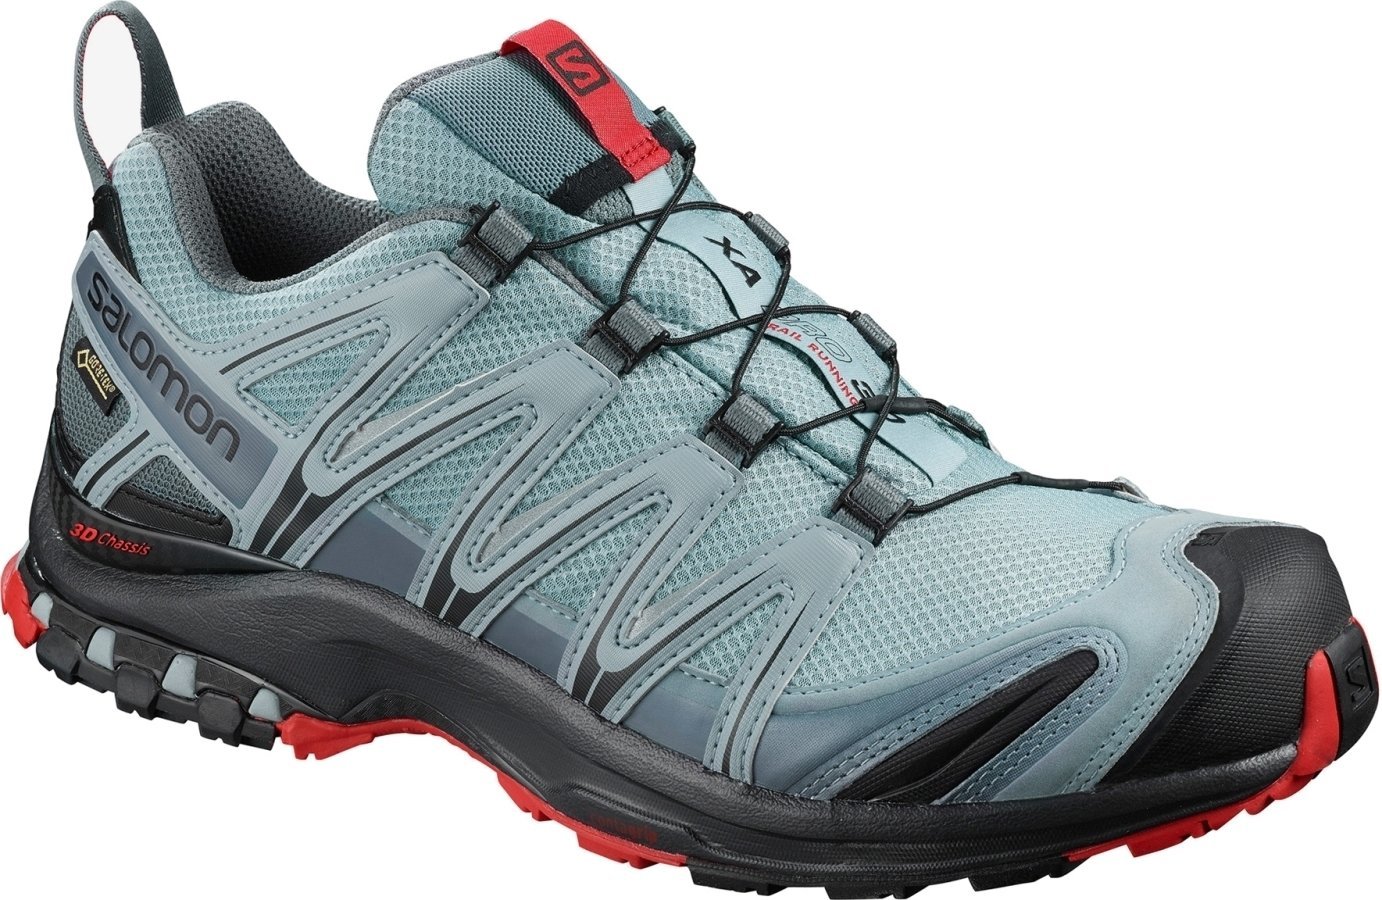 Chaussures outdoor hommes Salomon XA Pro 3D GTX Lead/Black/Barbados Cherry 45 1/3 Chaussures outdoor hommes